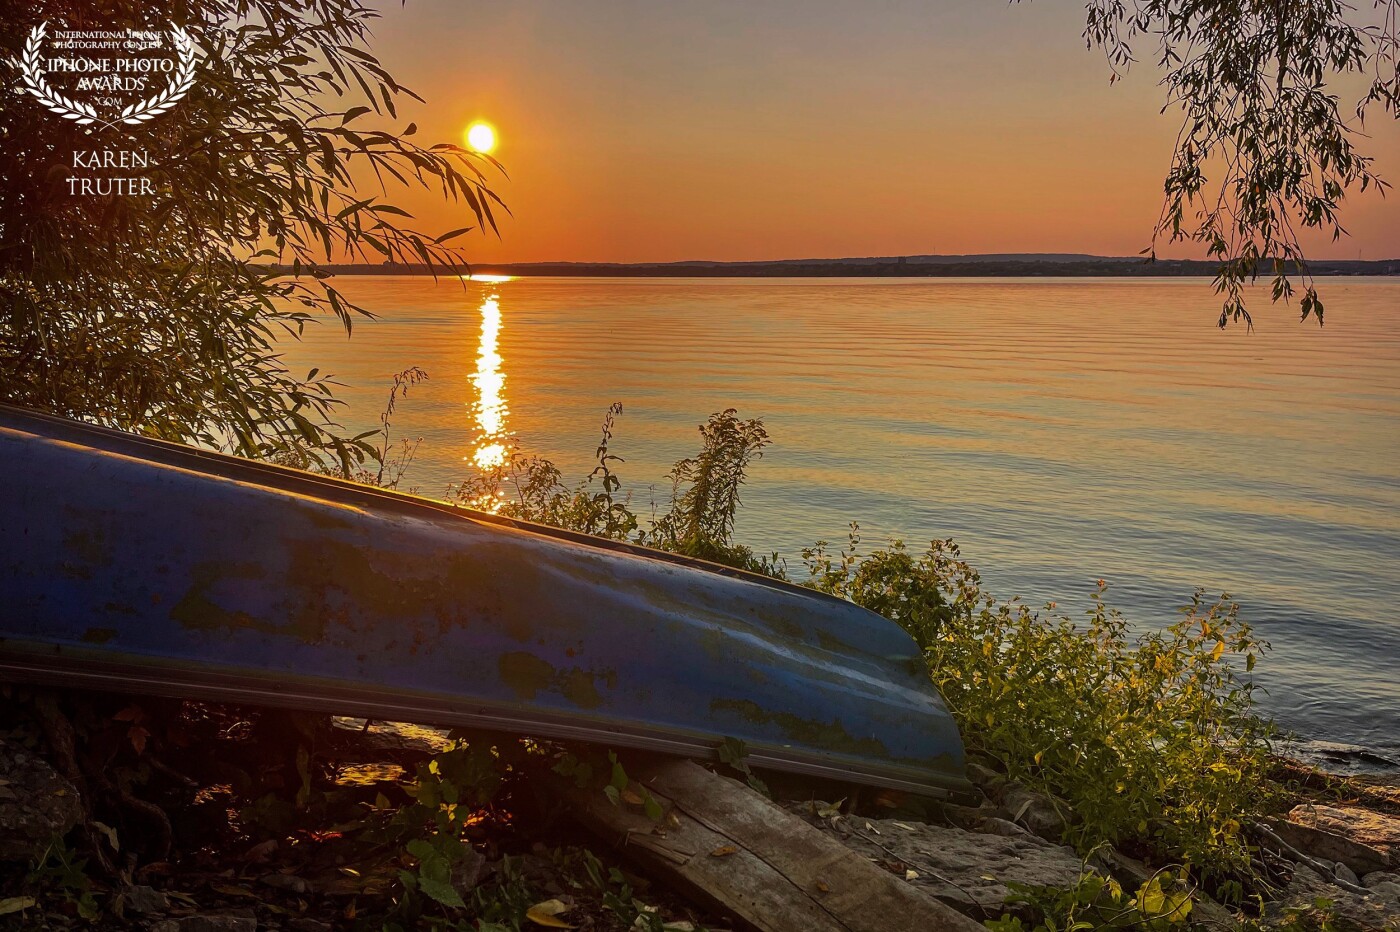 At the end of the day, at the setting sun when all is quiet, it is time for peace and reflection. Here in Canada, with so many lakes, the canoe is still the favourite choice on the water.